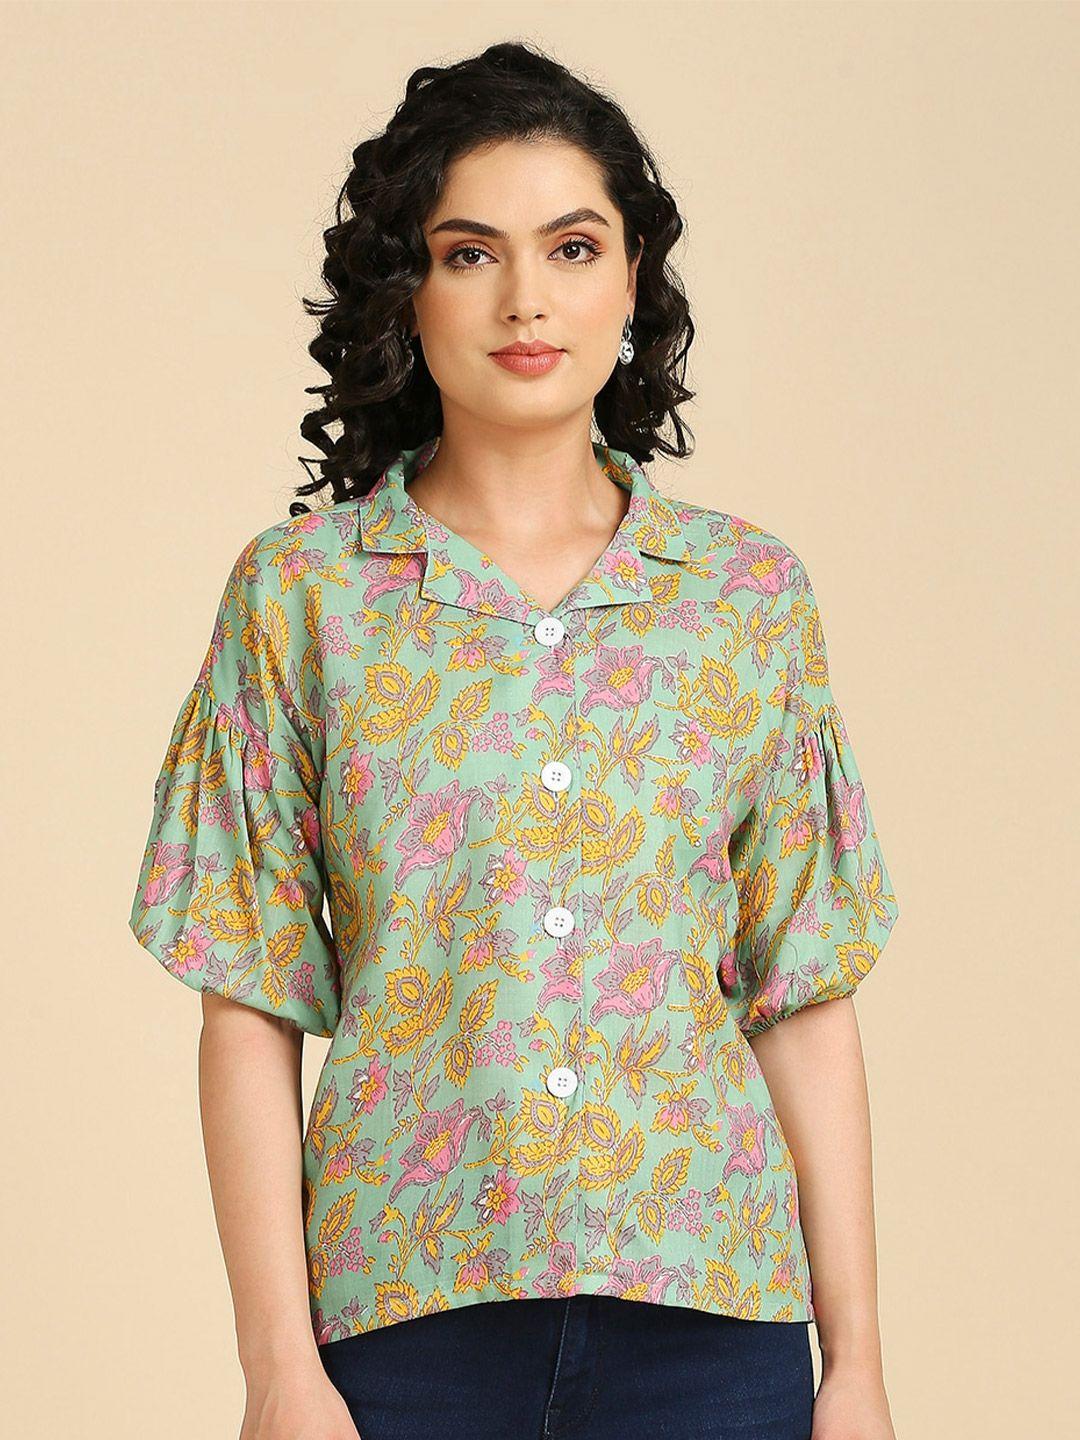 gufrina green floral print extended sleeves cotton shirt style top